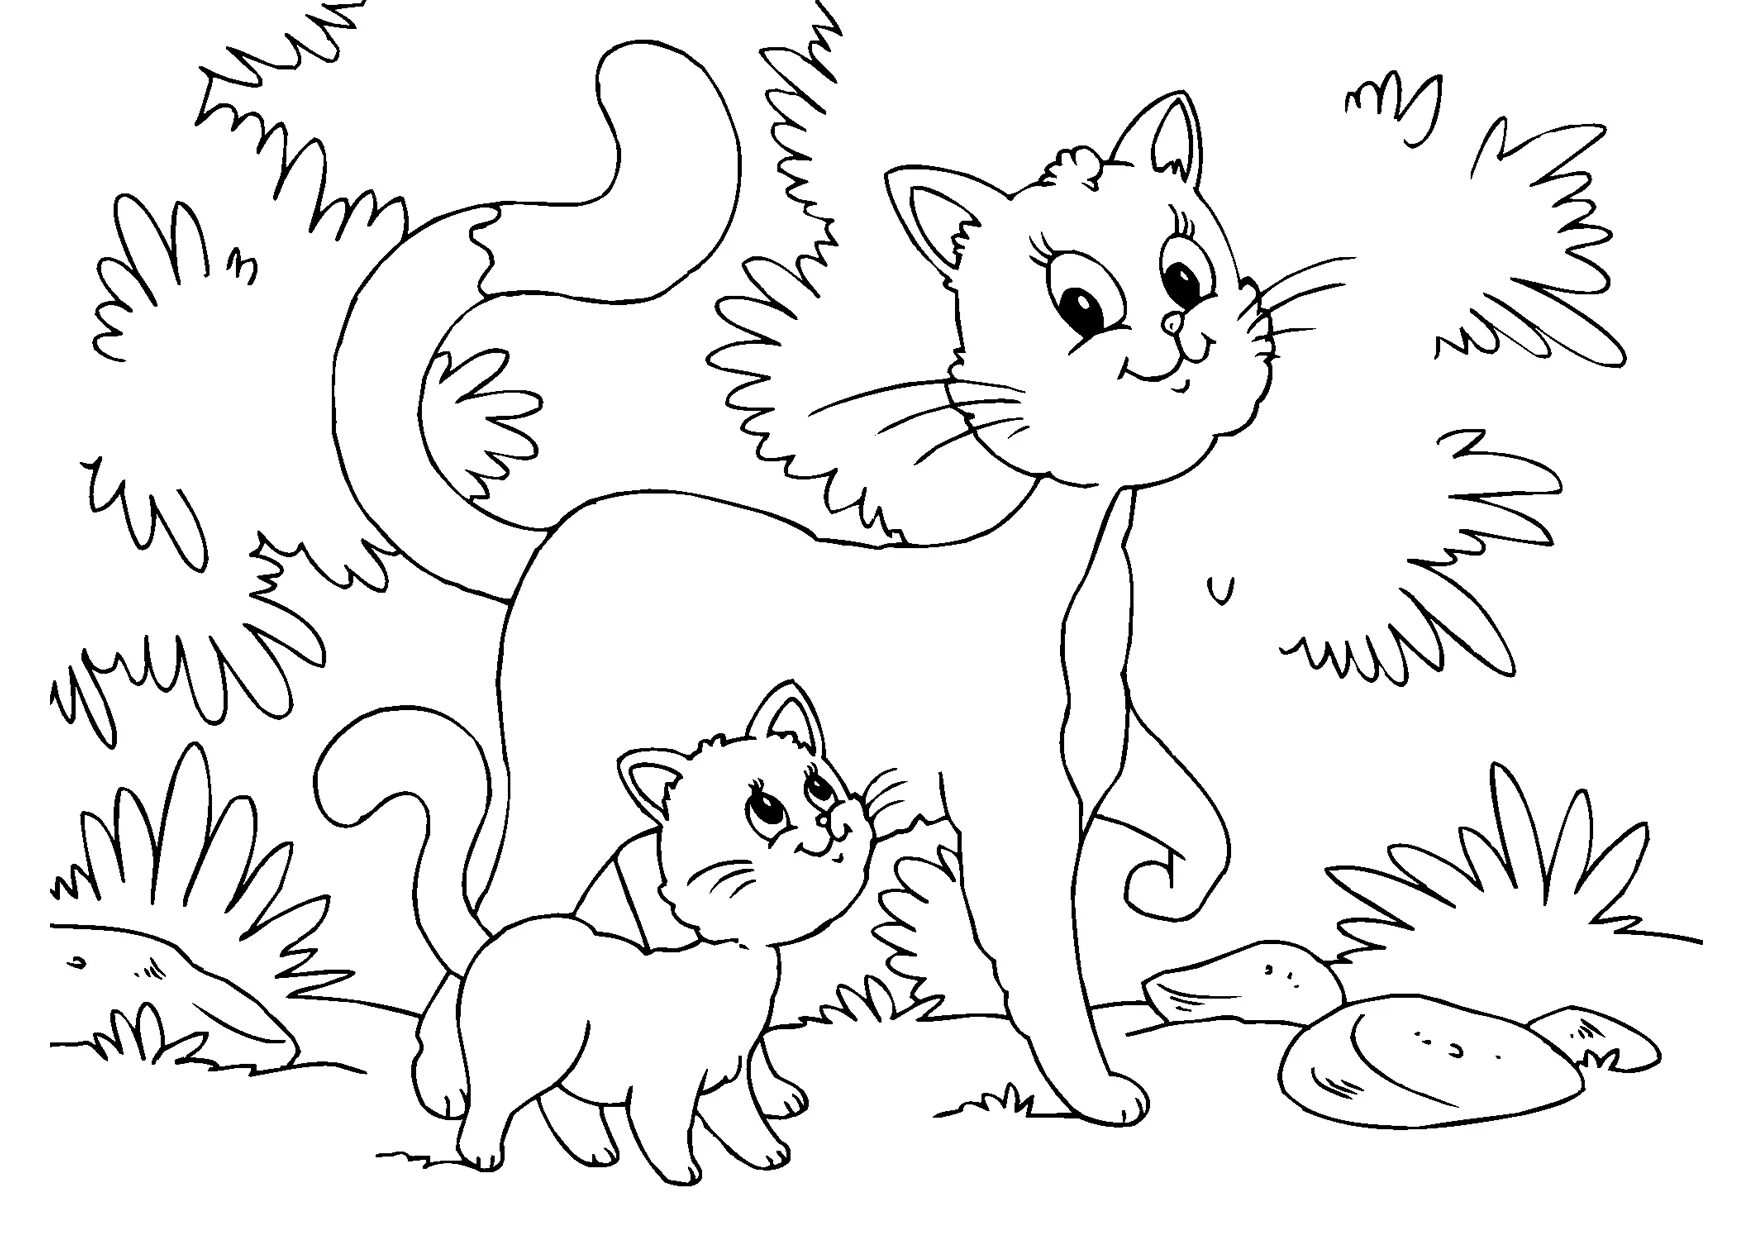 Coloring book spicy kittens for children 6-7 years old